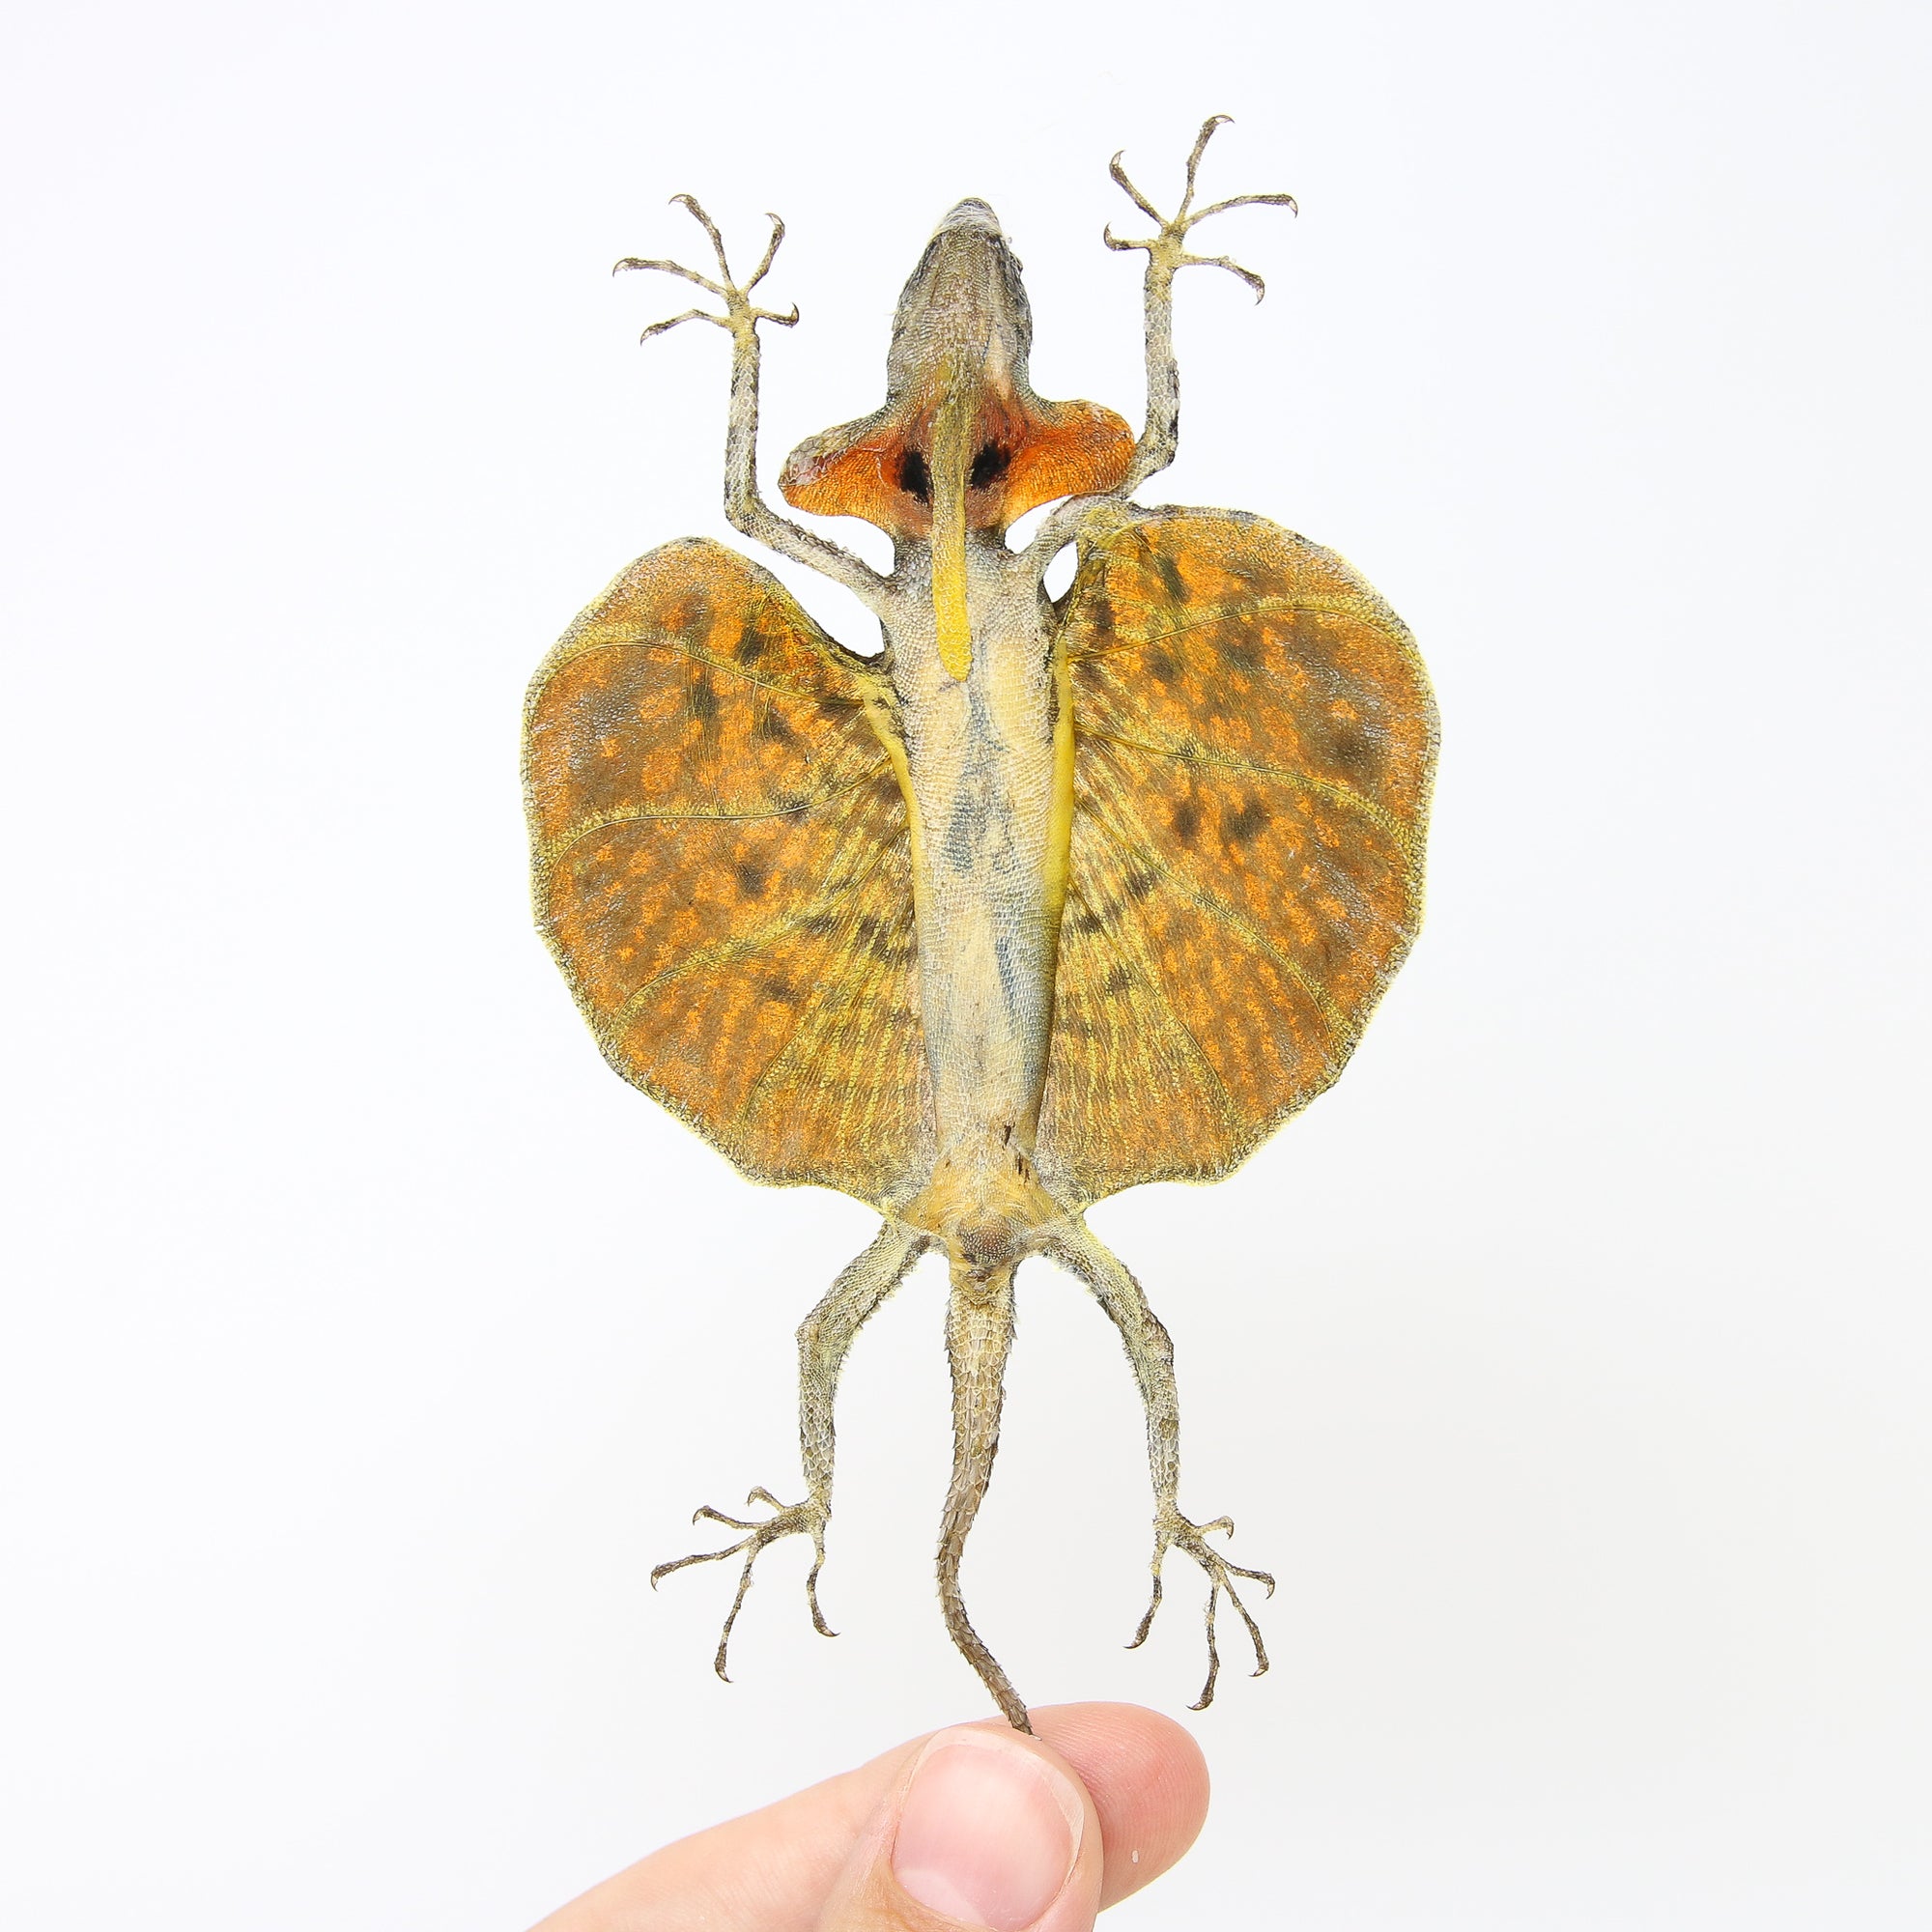 TWO (2) PAIR of Draco Flying Lizards (Draco haematopogon) | A1 Spread Specimens 20cm | Indonesia Java | Dry-Preserved Taxidermy